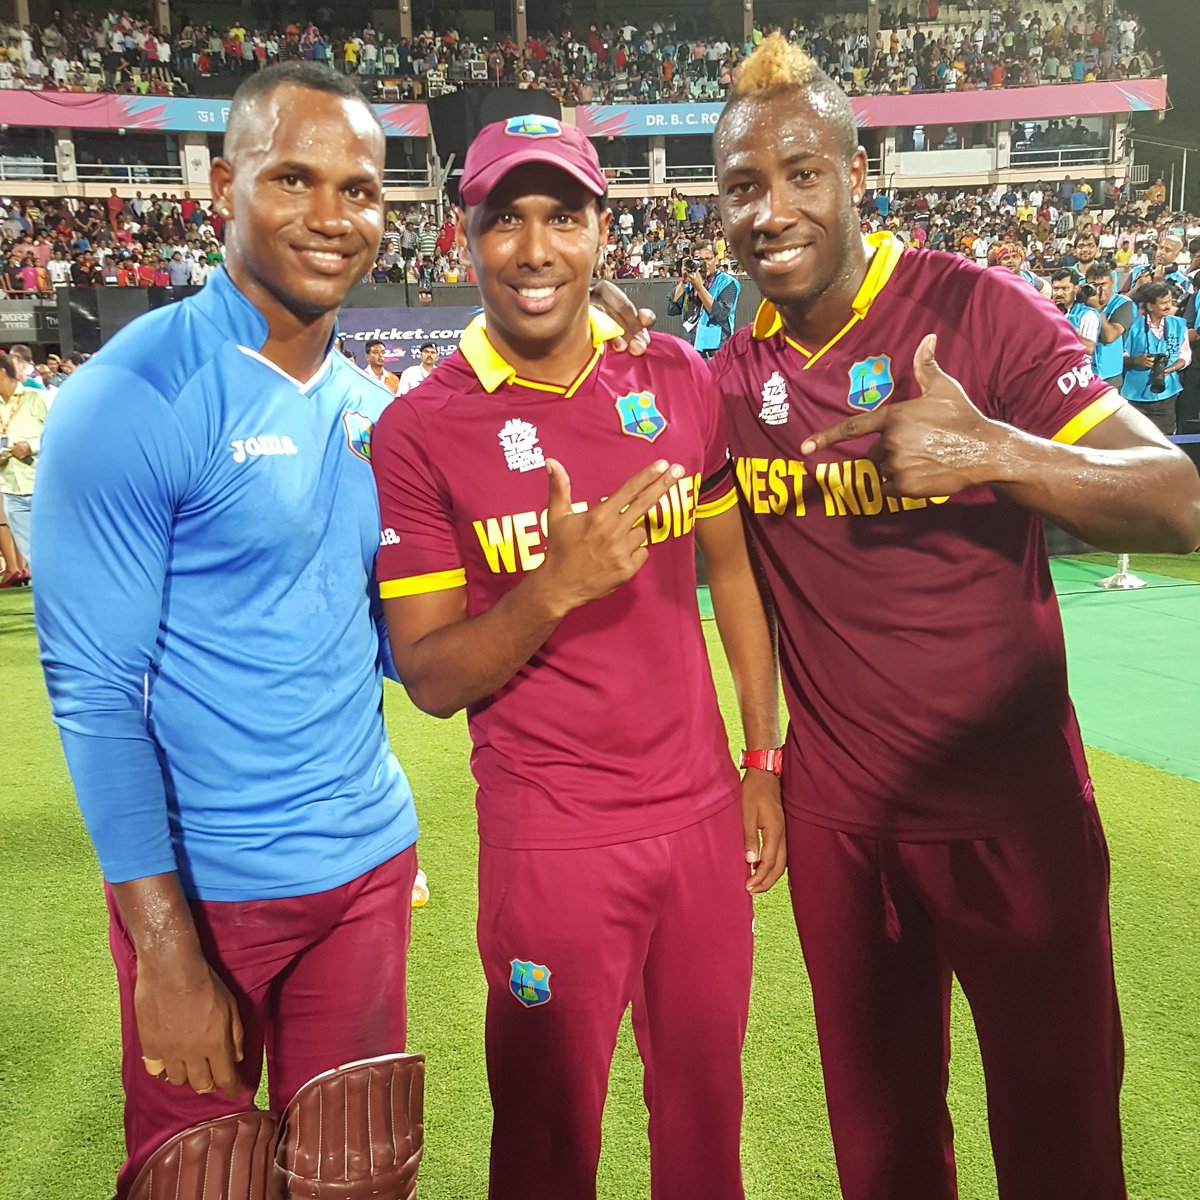 The best T20 teams have spinners who can bowl anytime in the game, observes Samuel Badree